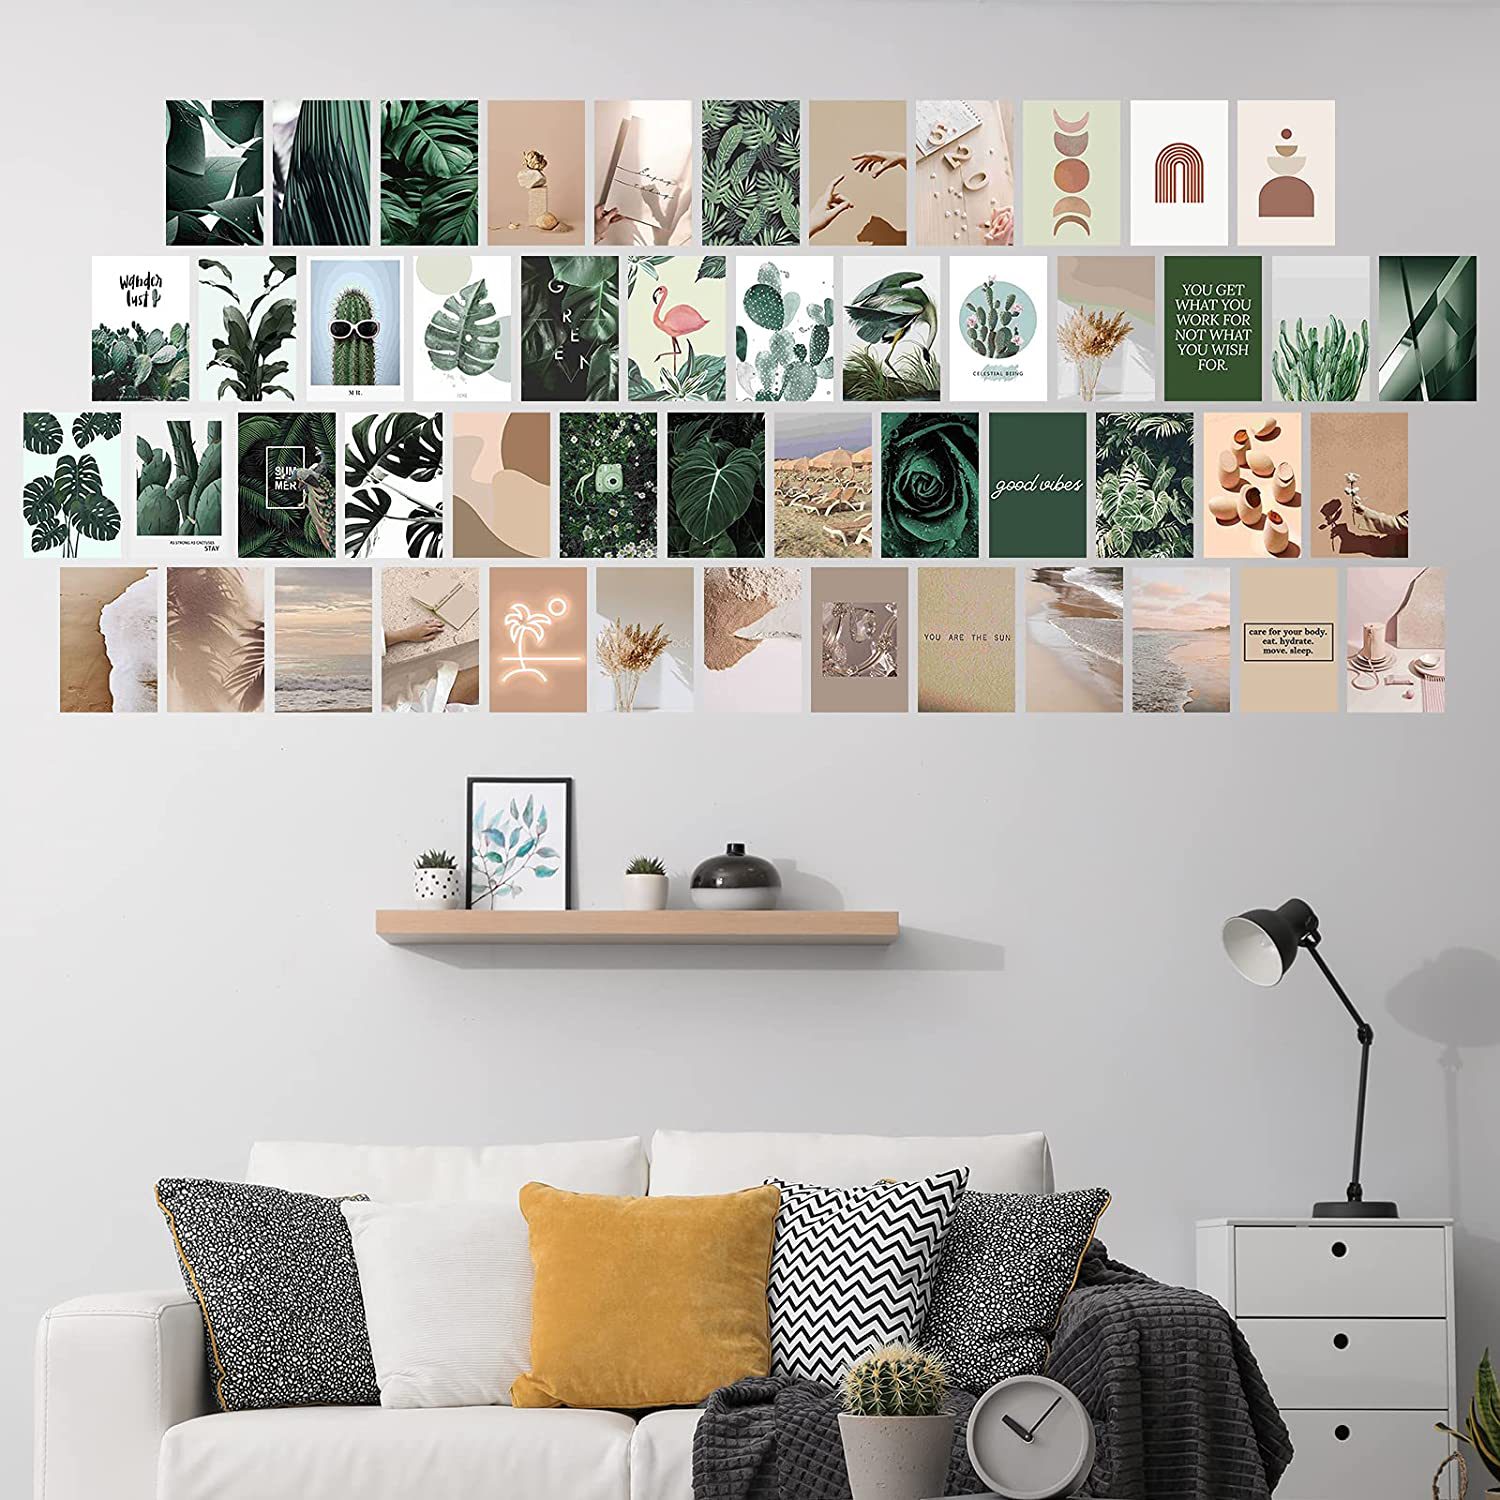 50Pcs Boho Wall Collage Kit Aesthetic Pictures, Room Decor for Bedroom Aesthetic Teens Girls, Boho Pictures Wall Decor, Cute Plants Photo Wall Collage Kit, Aesthetic Posters, Dorm Wall Art 4x6 Inch